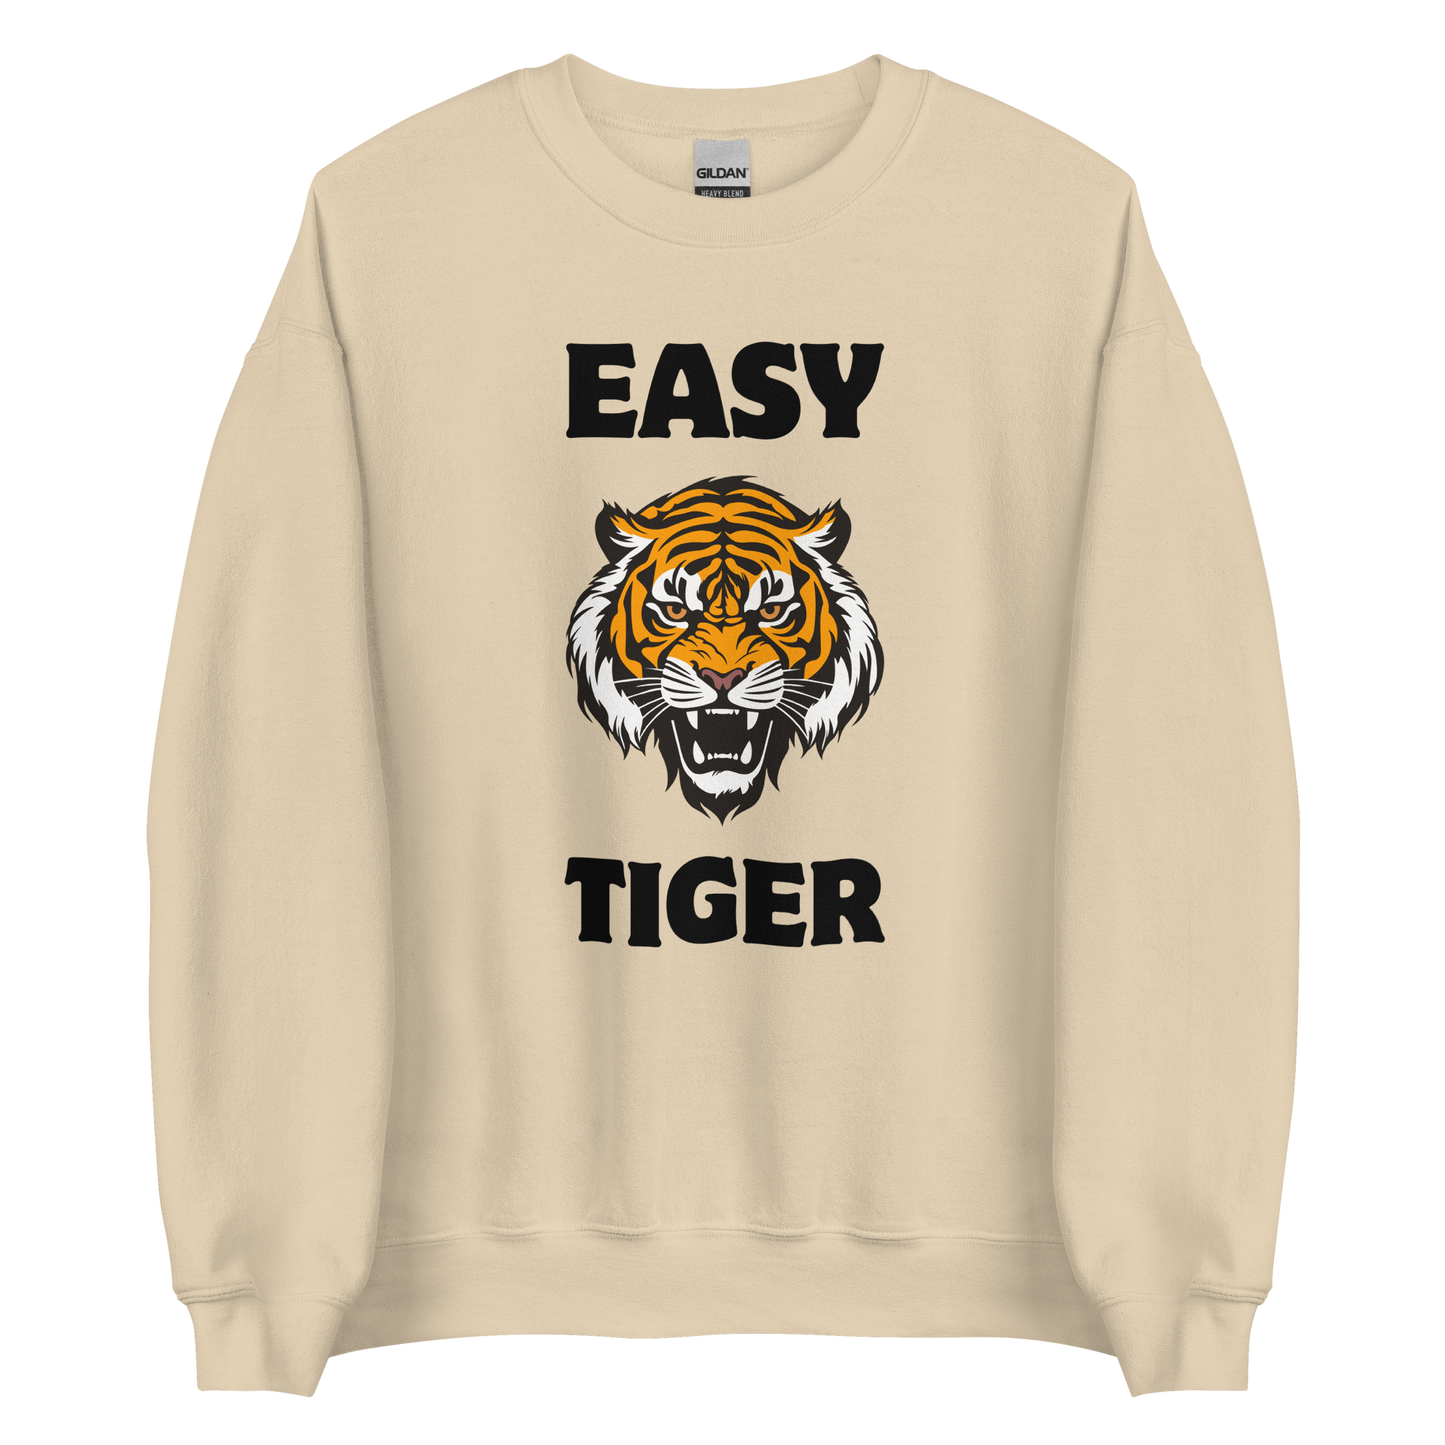 Sand Colored Tiger Sweatshirt featuring a Easy Tiger graphic on the chest - Funny Graphic Tiger Sweatshirts - Boozy Fox